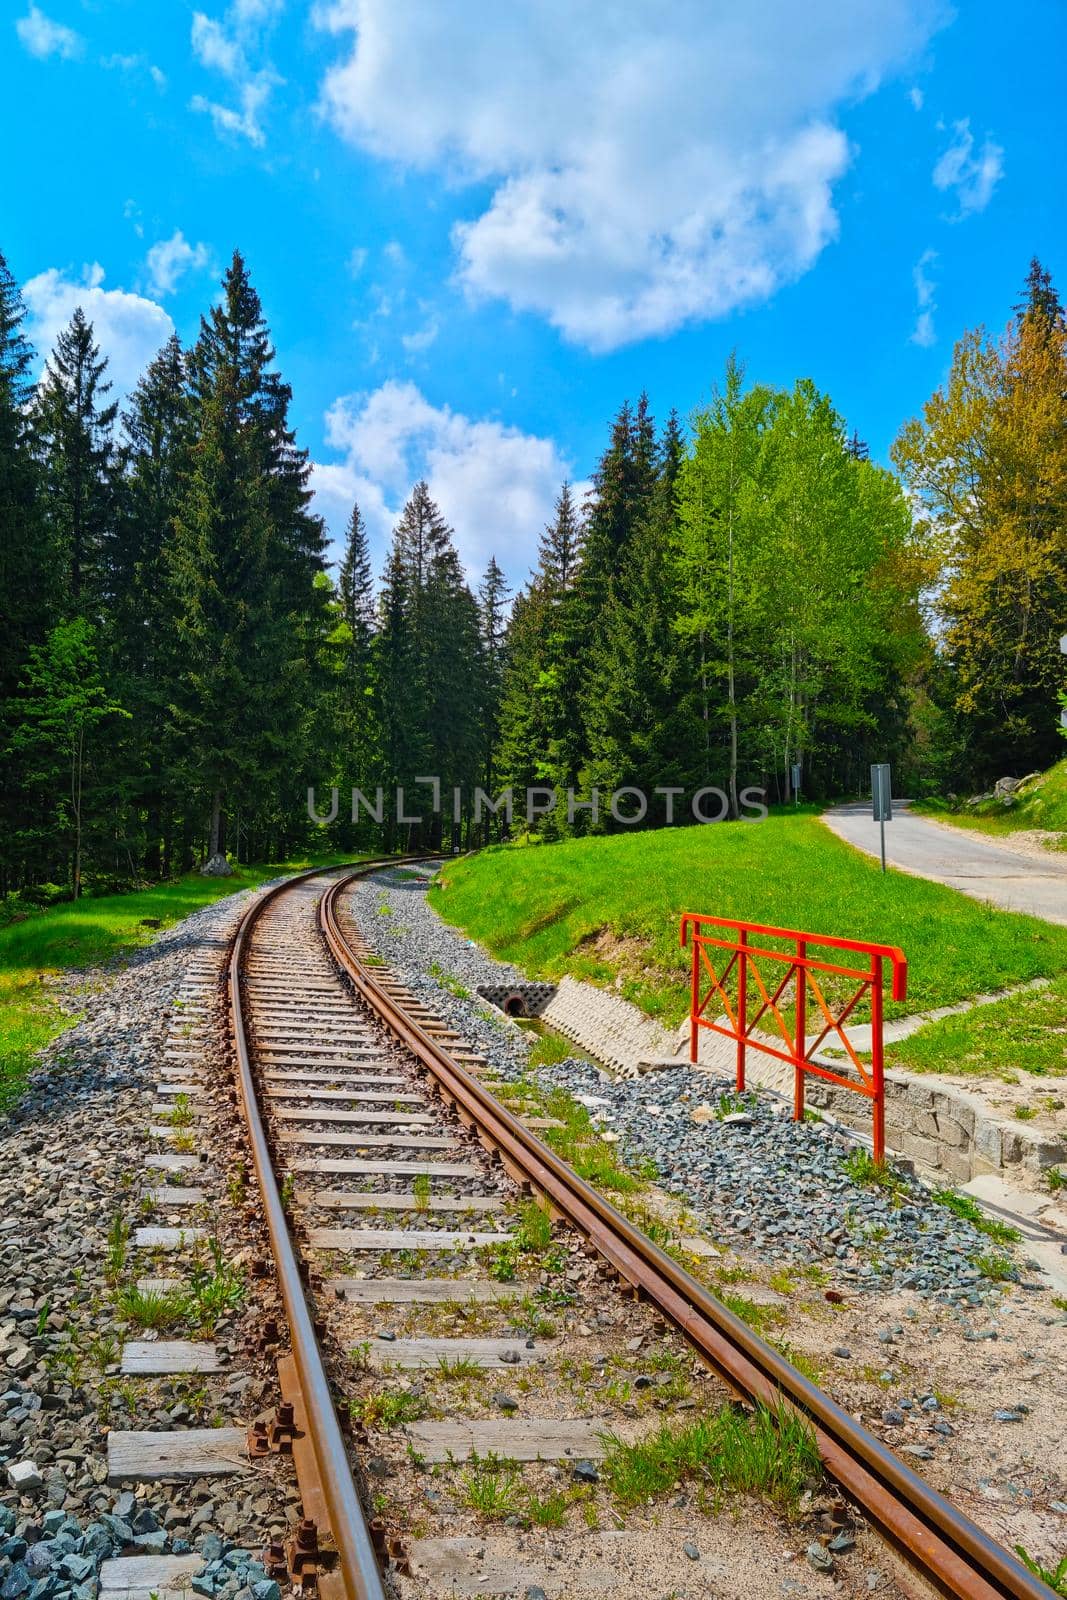 A picturesque railway track through a green forest. by kip02kas